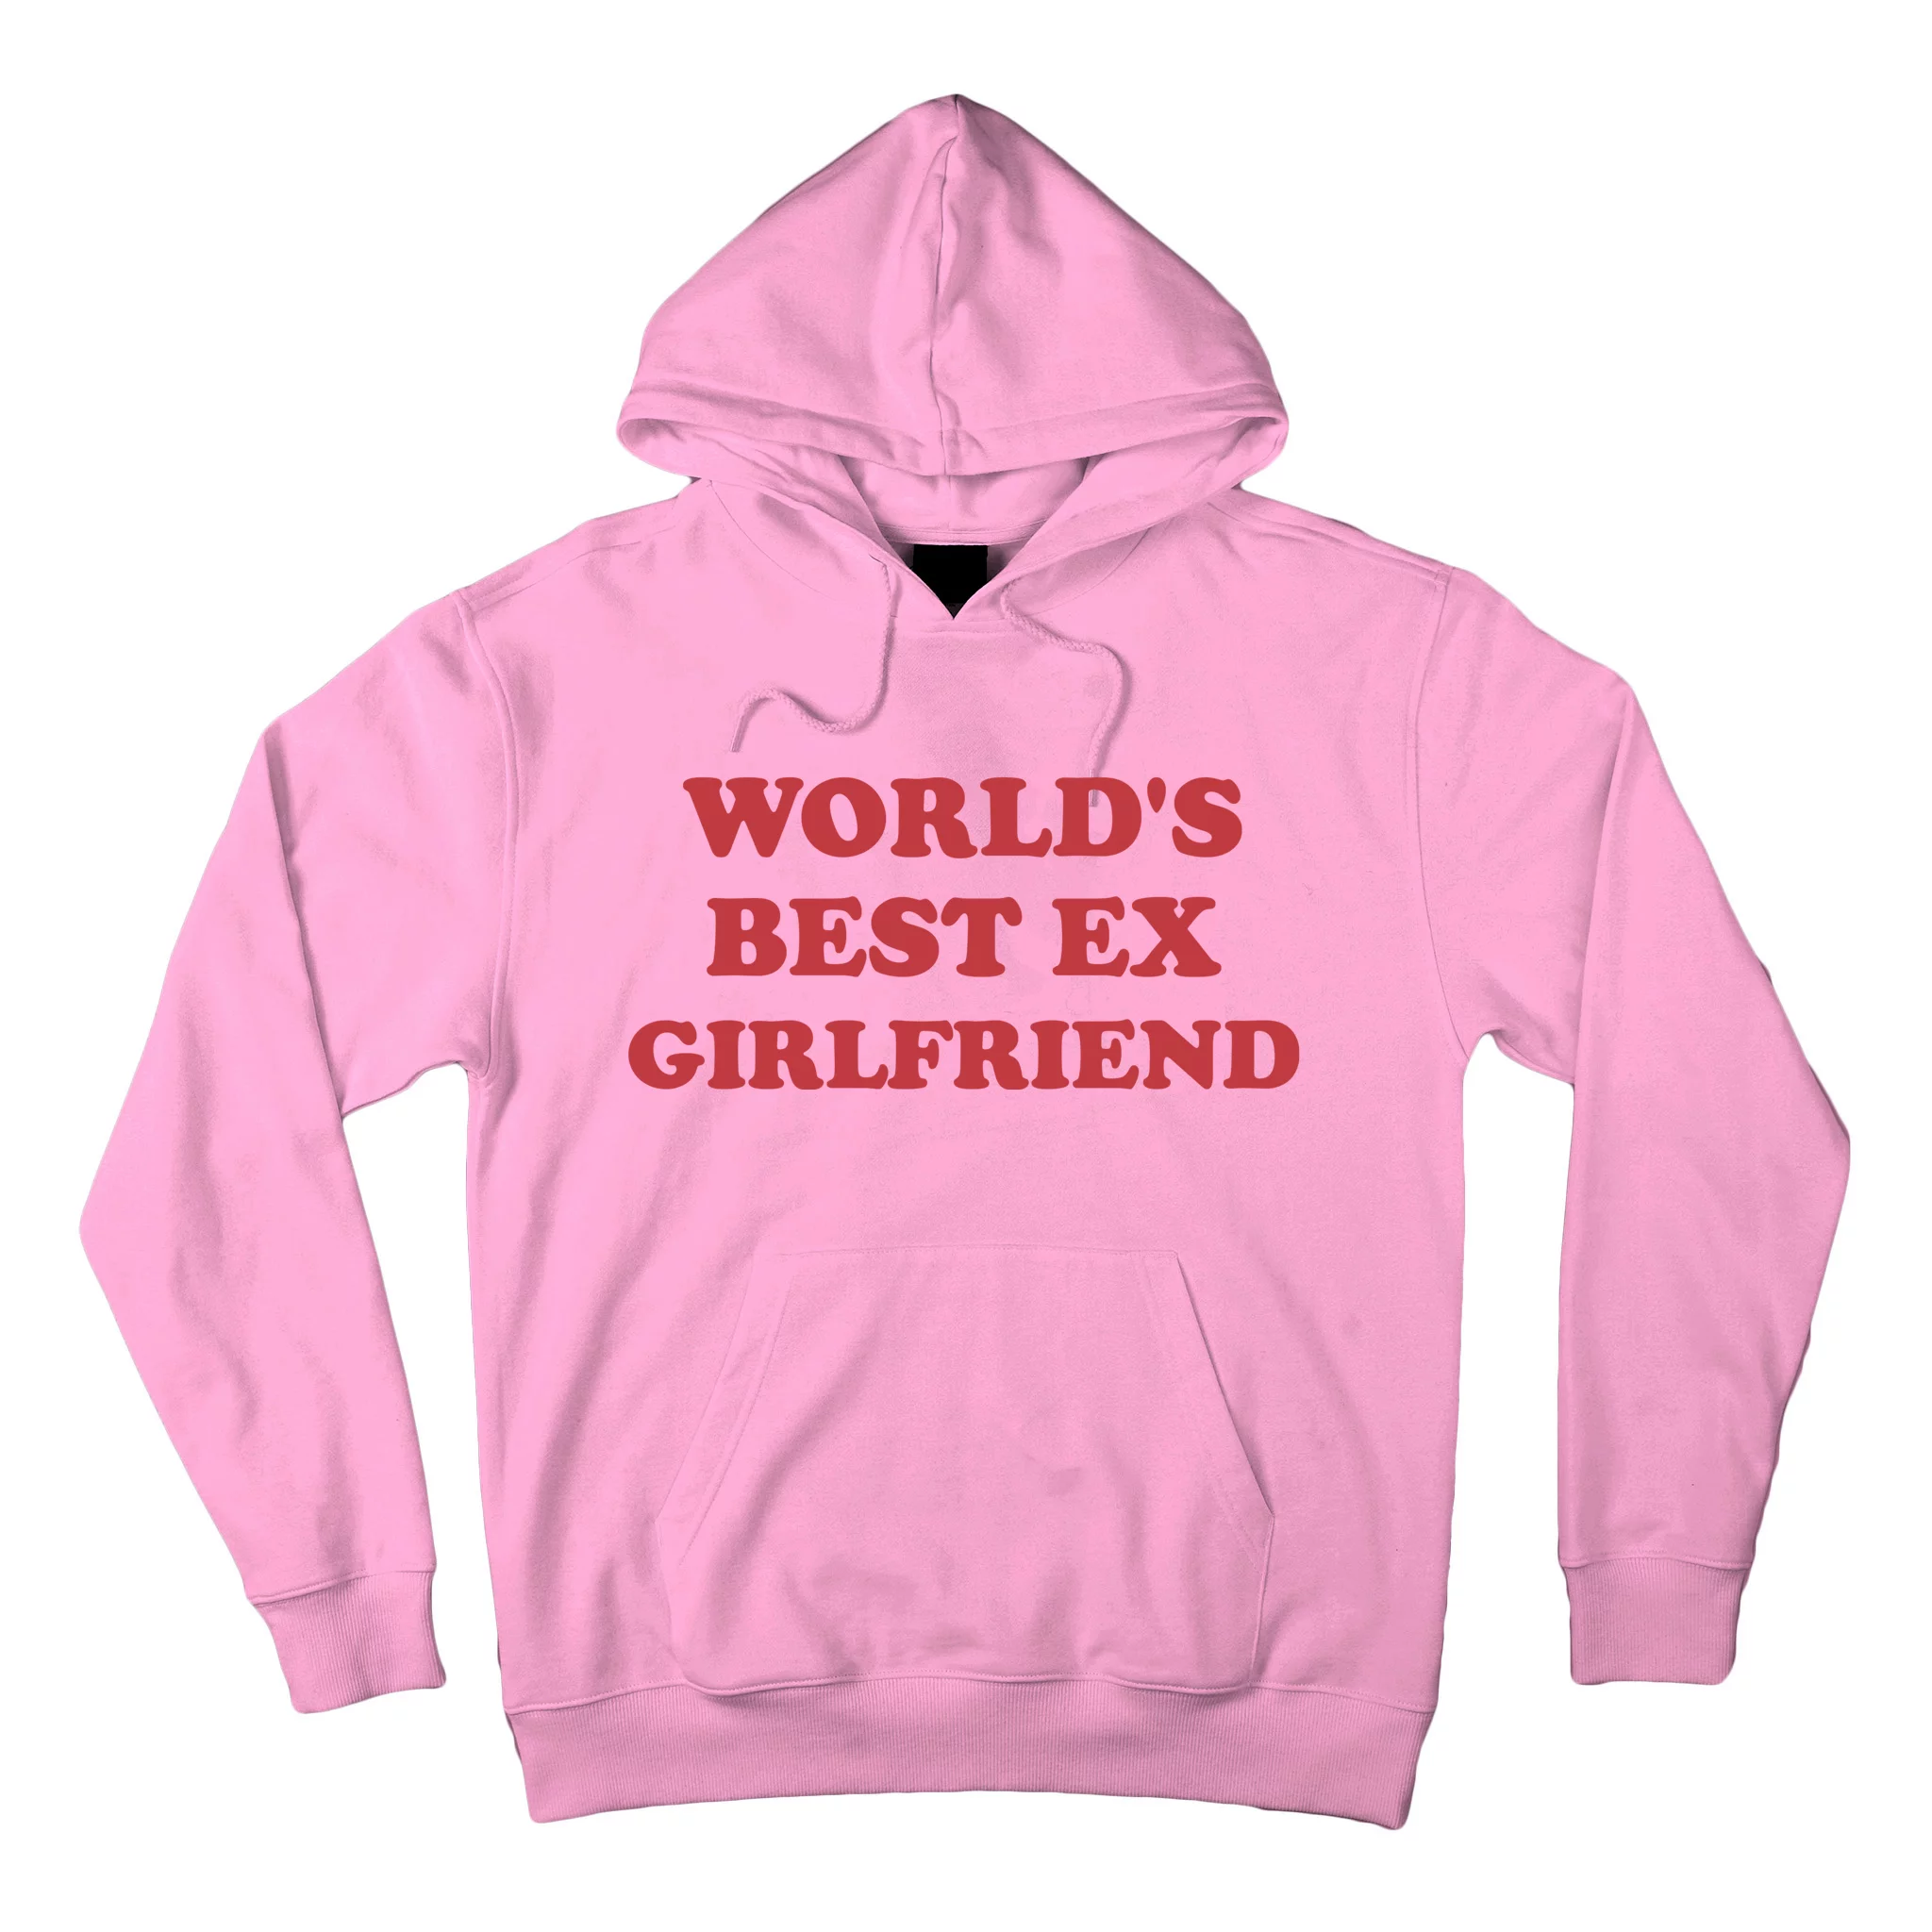 wbe6993110 worlds best ex girlfriend funny gift pink afth garment